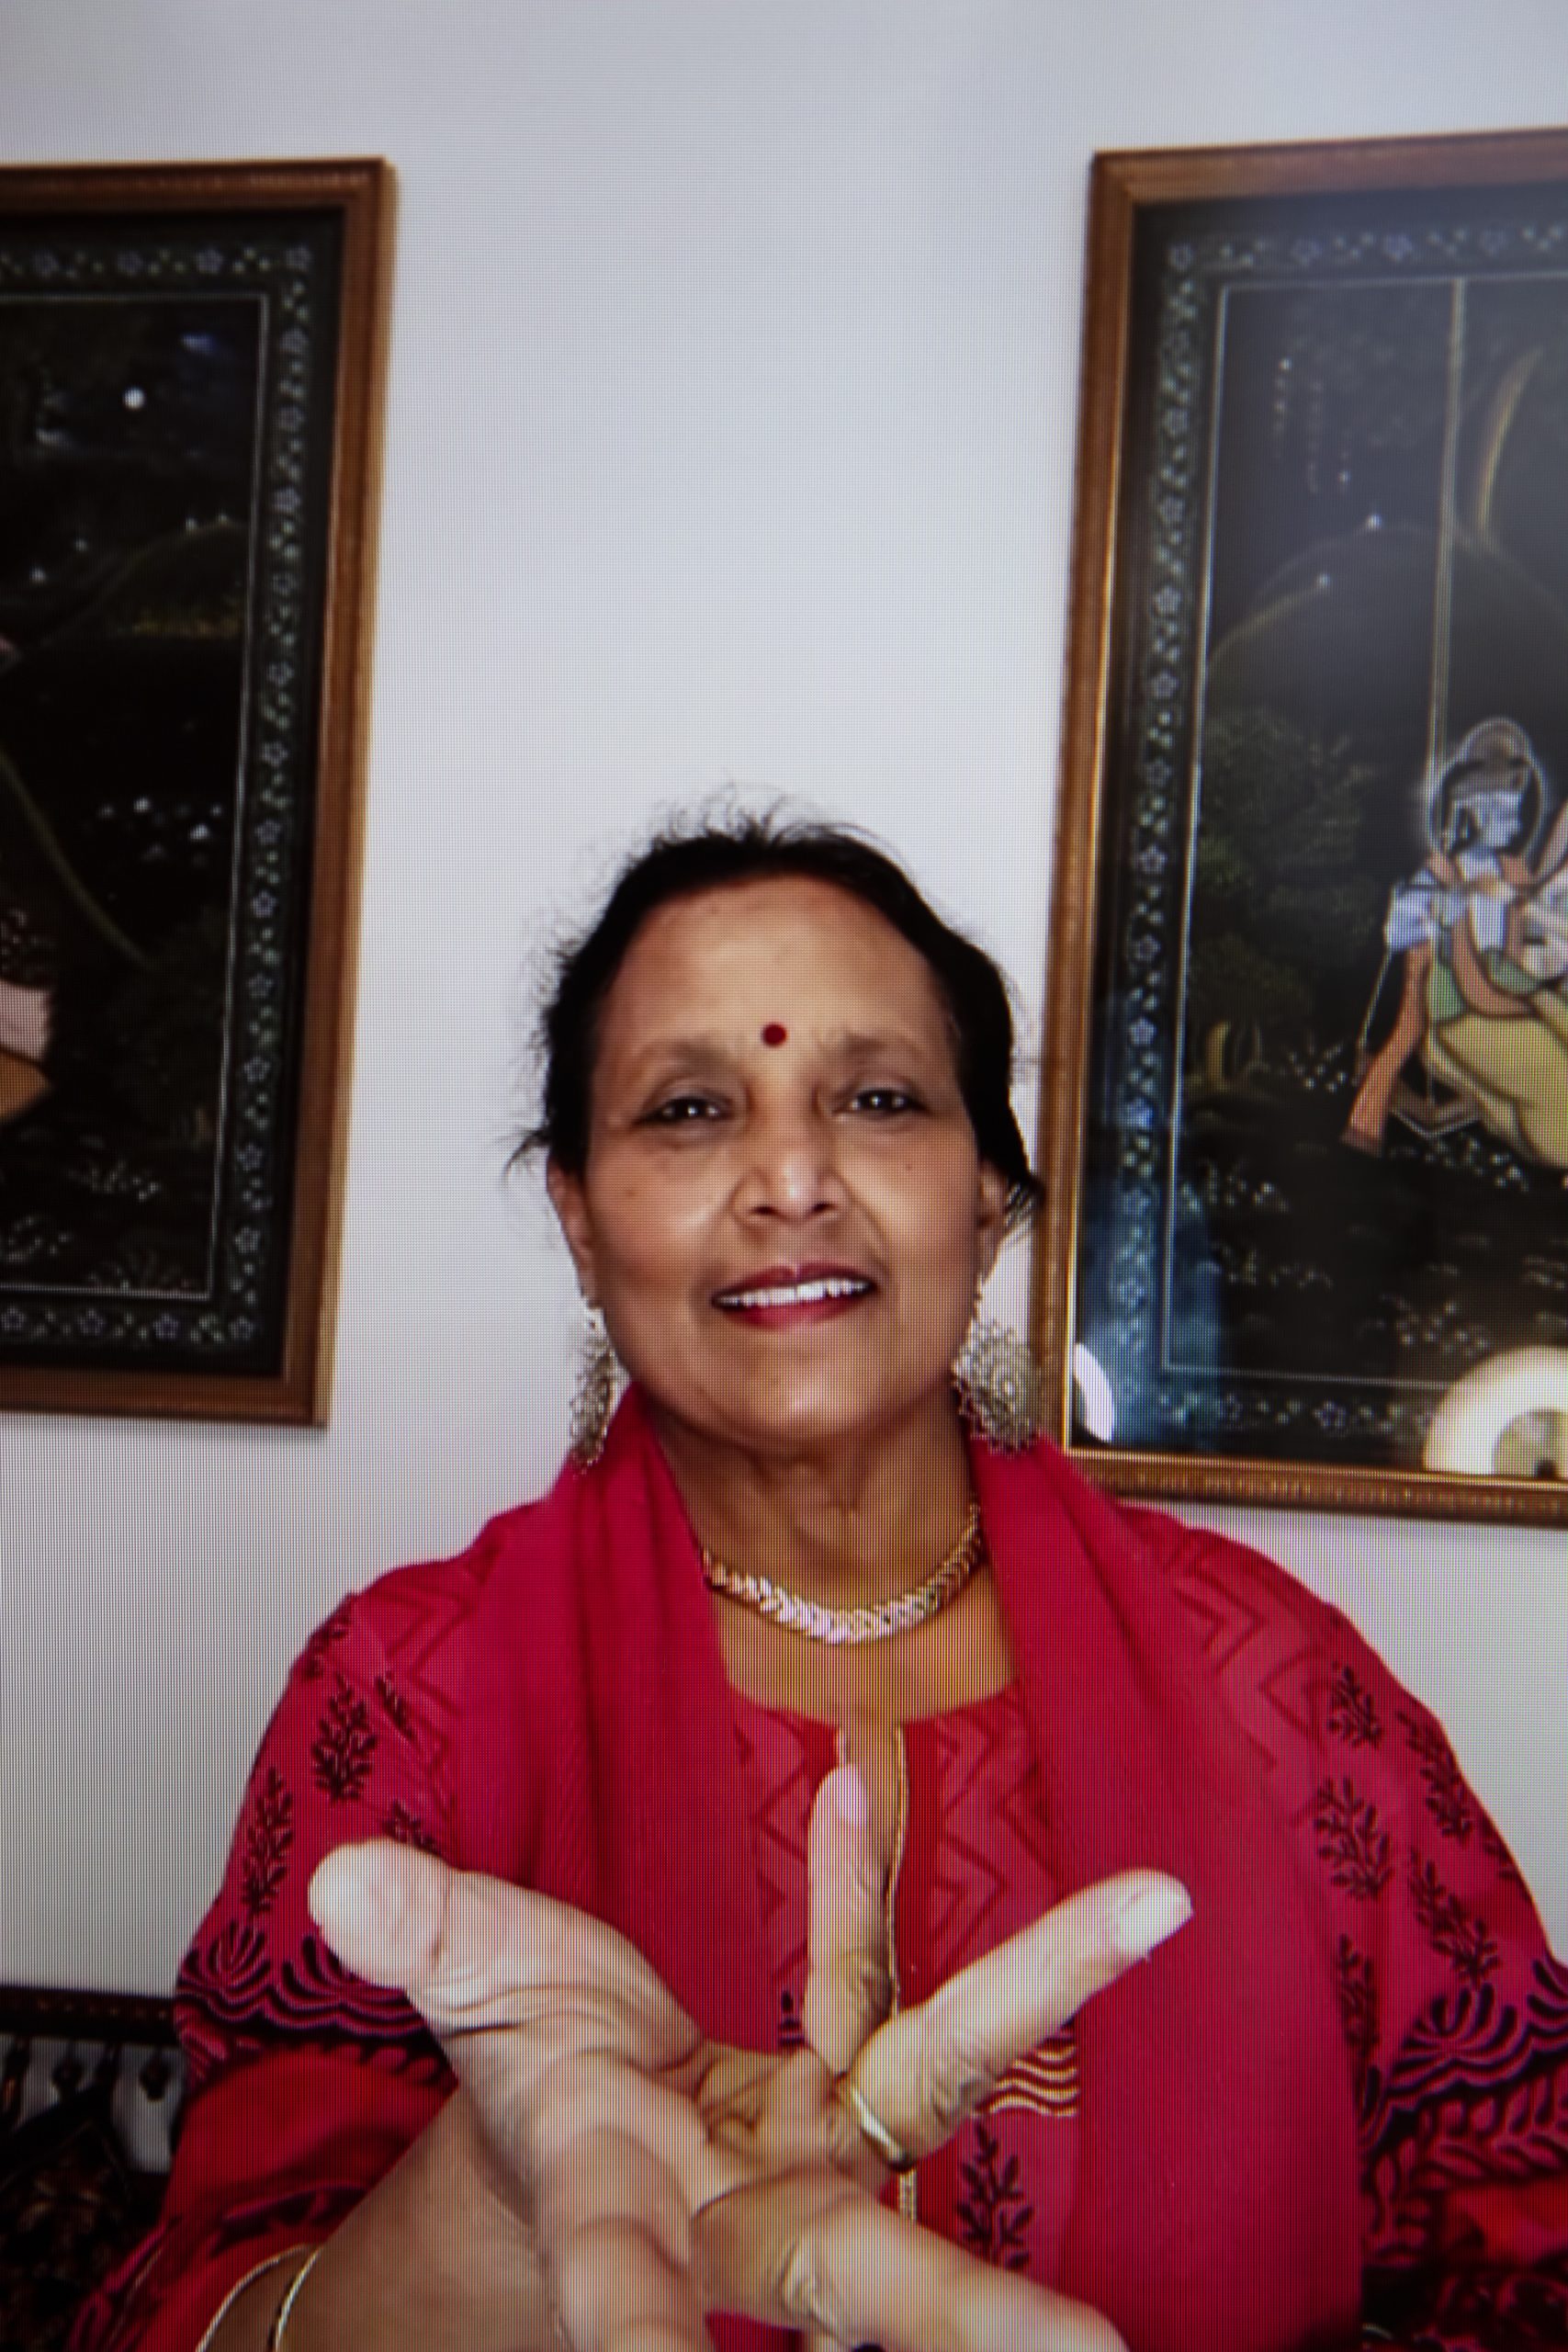 Nilima Devi smiles as she looks into the camera, her hand outstretched to the screen and fingers stretched to form a wheel shape. She wears a gold ring and necklace and her dark brown hair is tied away from her face. Nilima wears a red outfit which is decorated with gold and black embroidered patterns.